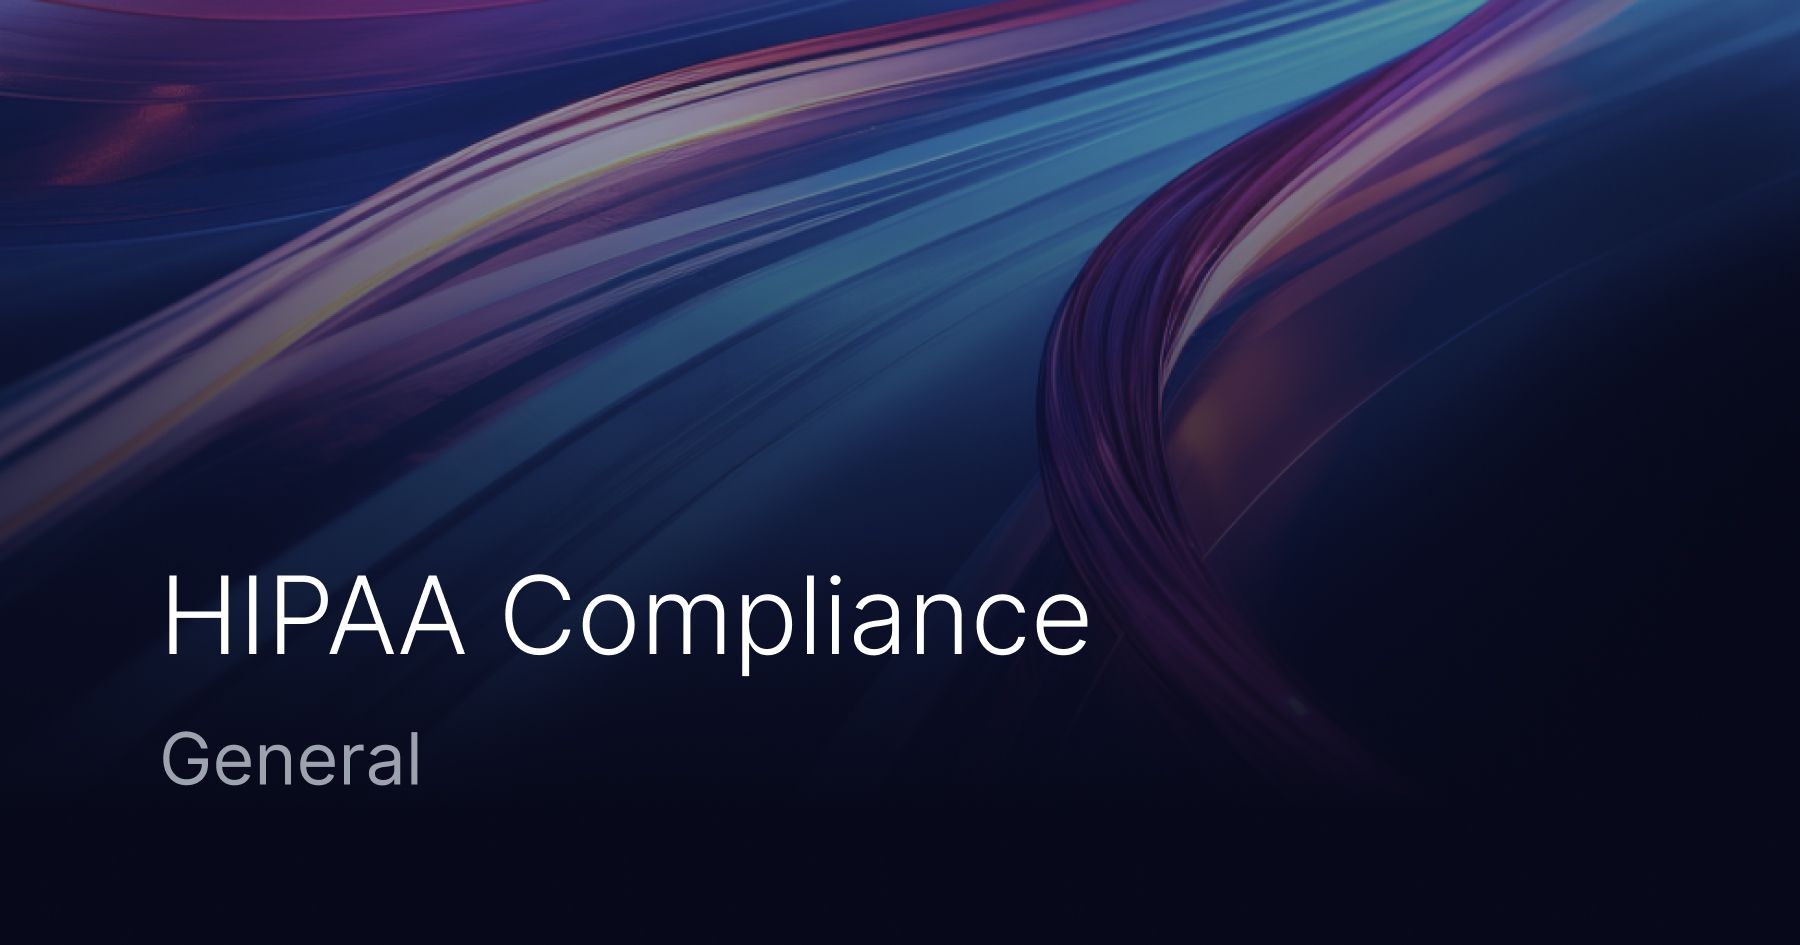 HIPAA Compliance Checklist 2023: The 8-step Easy Guide